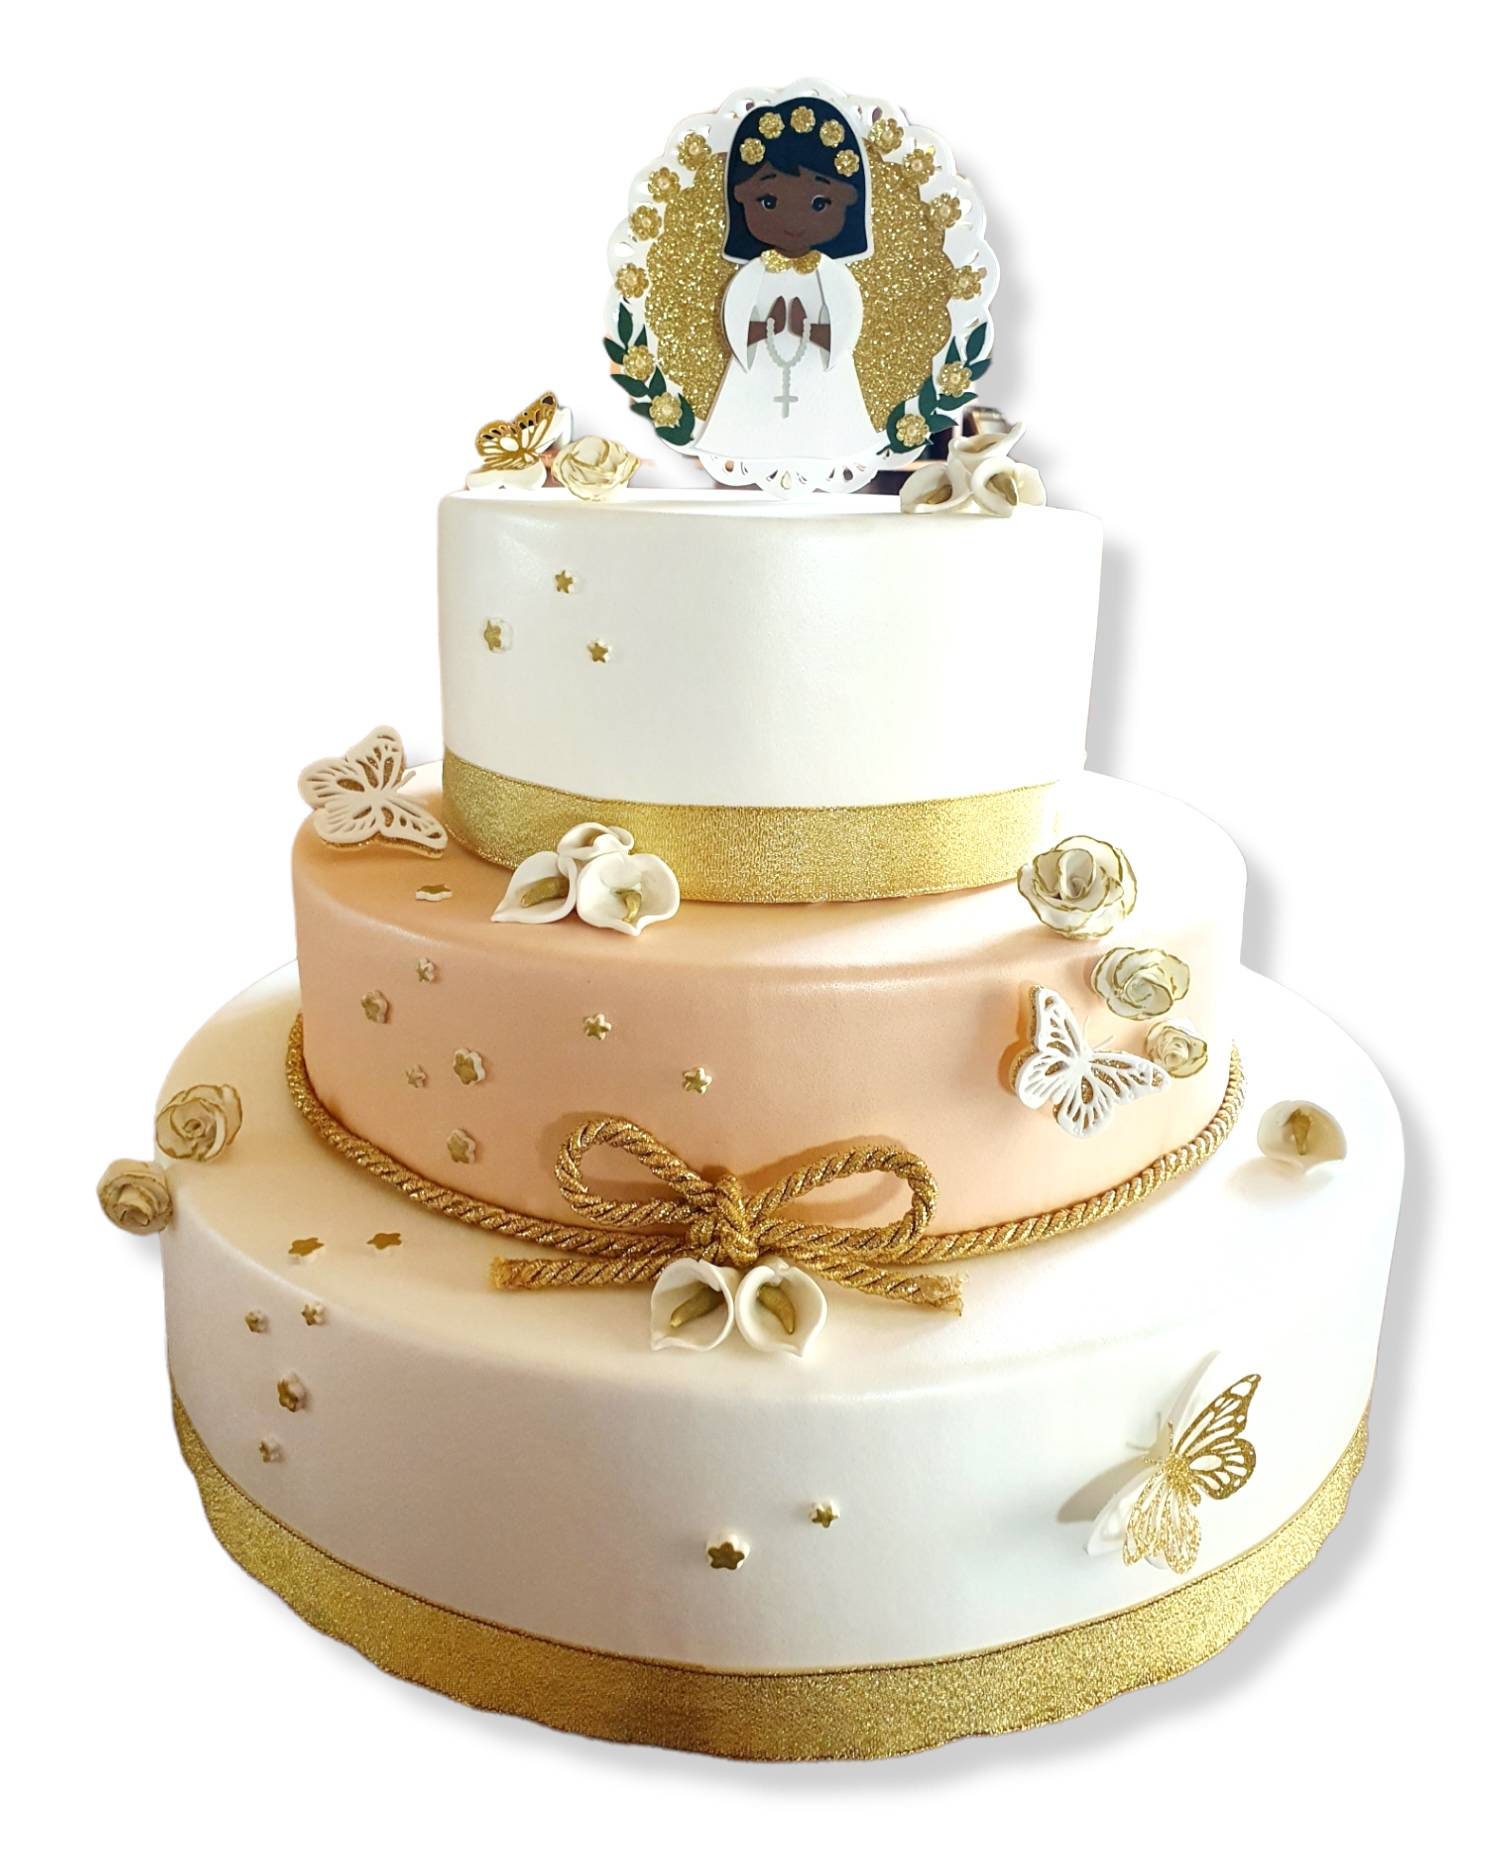 Fake Scenographic Cake in Eva Rubber, Fimo and Paper. Ideal for Communions,  Confirmations, Baptisms and More 